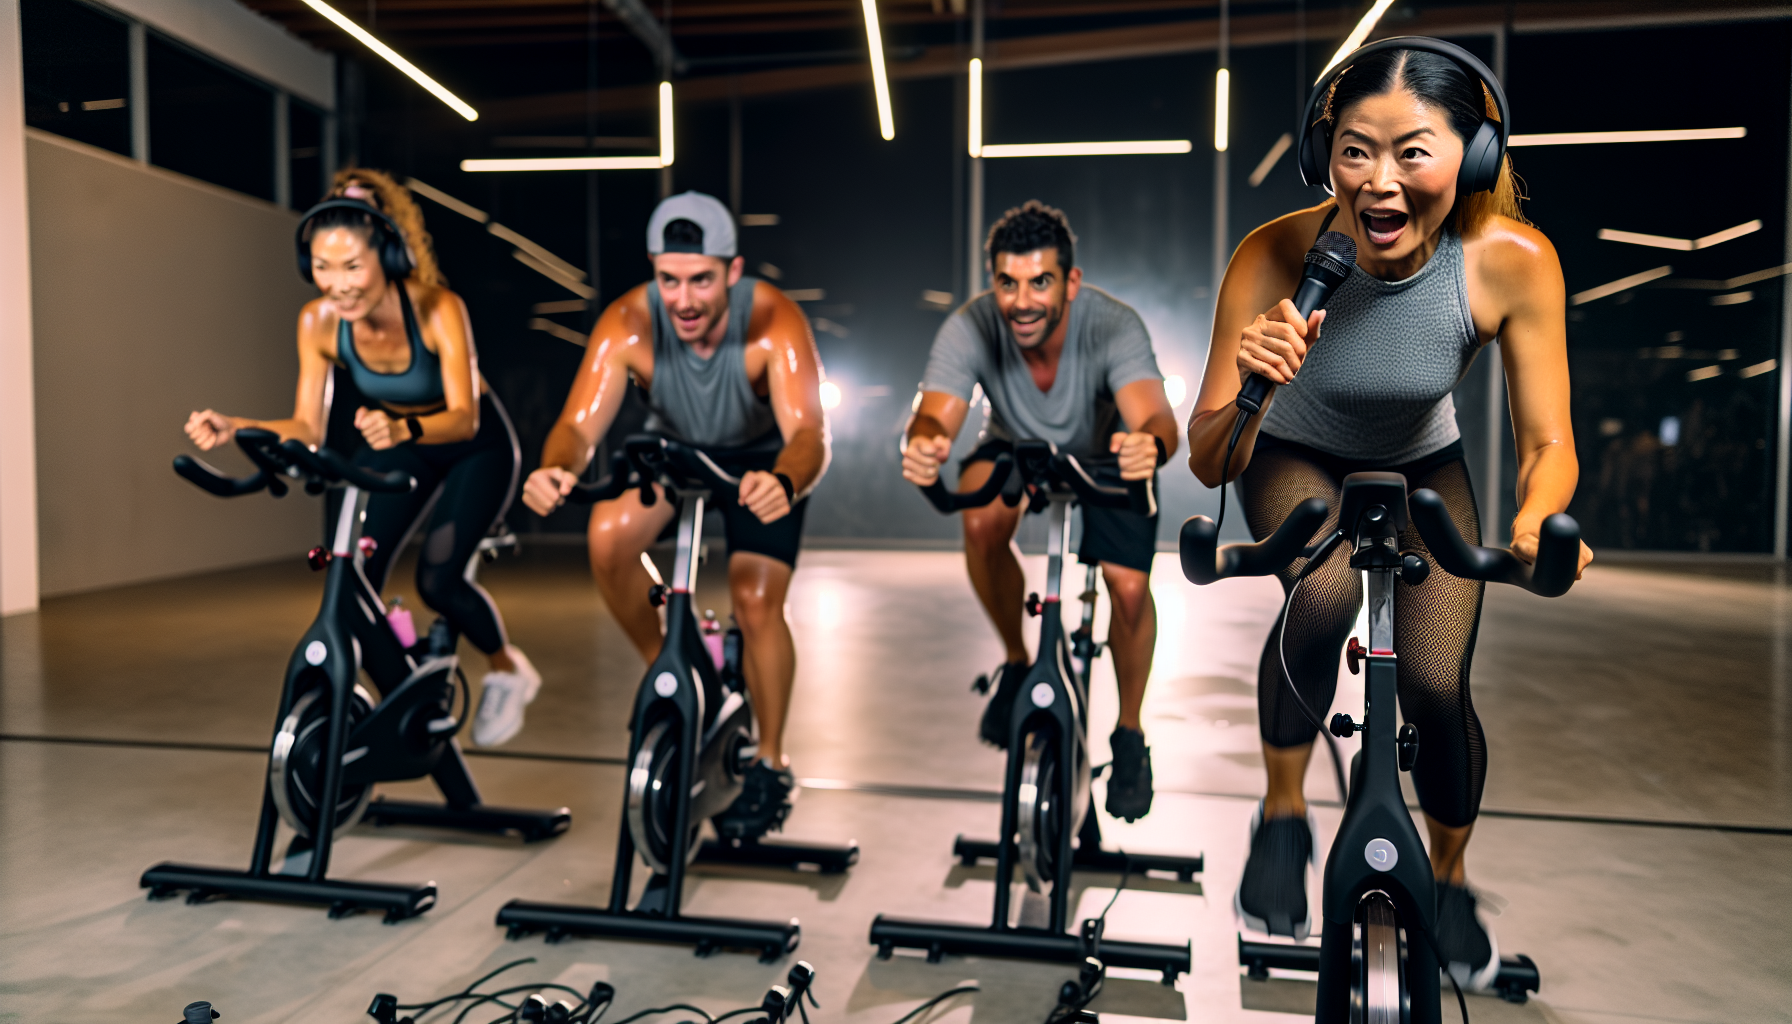 A group of people participating in a high-intensity indoor cycling class